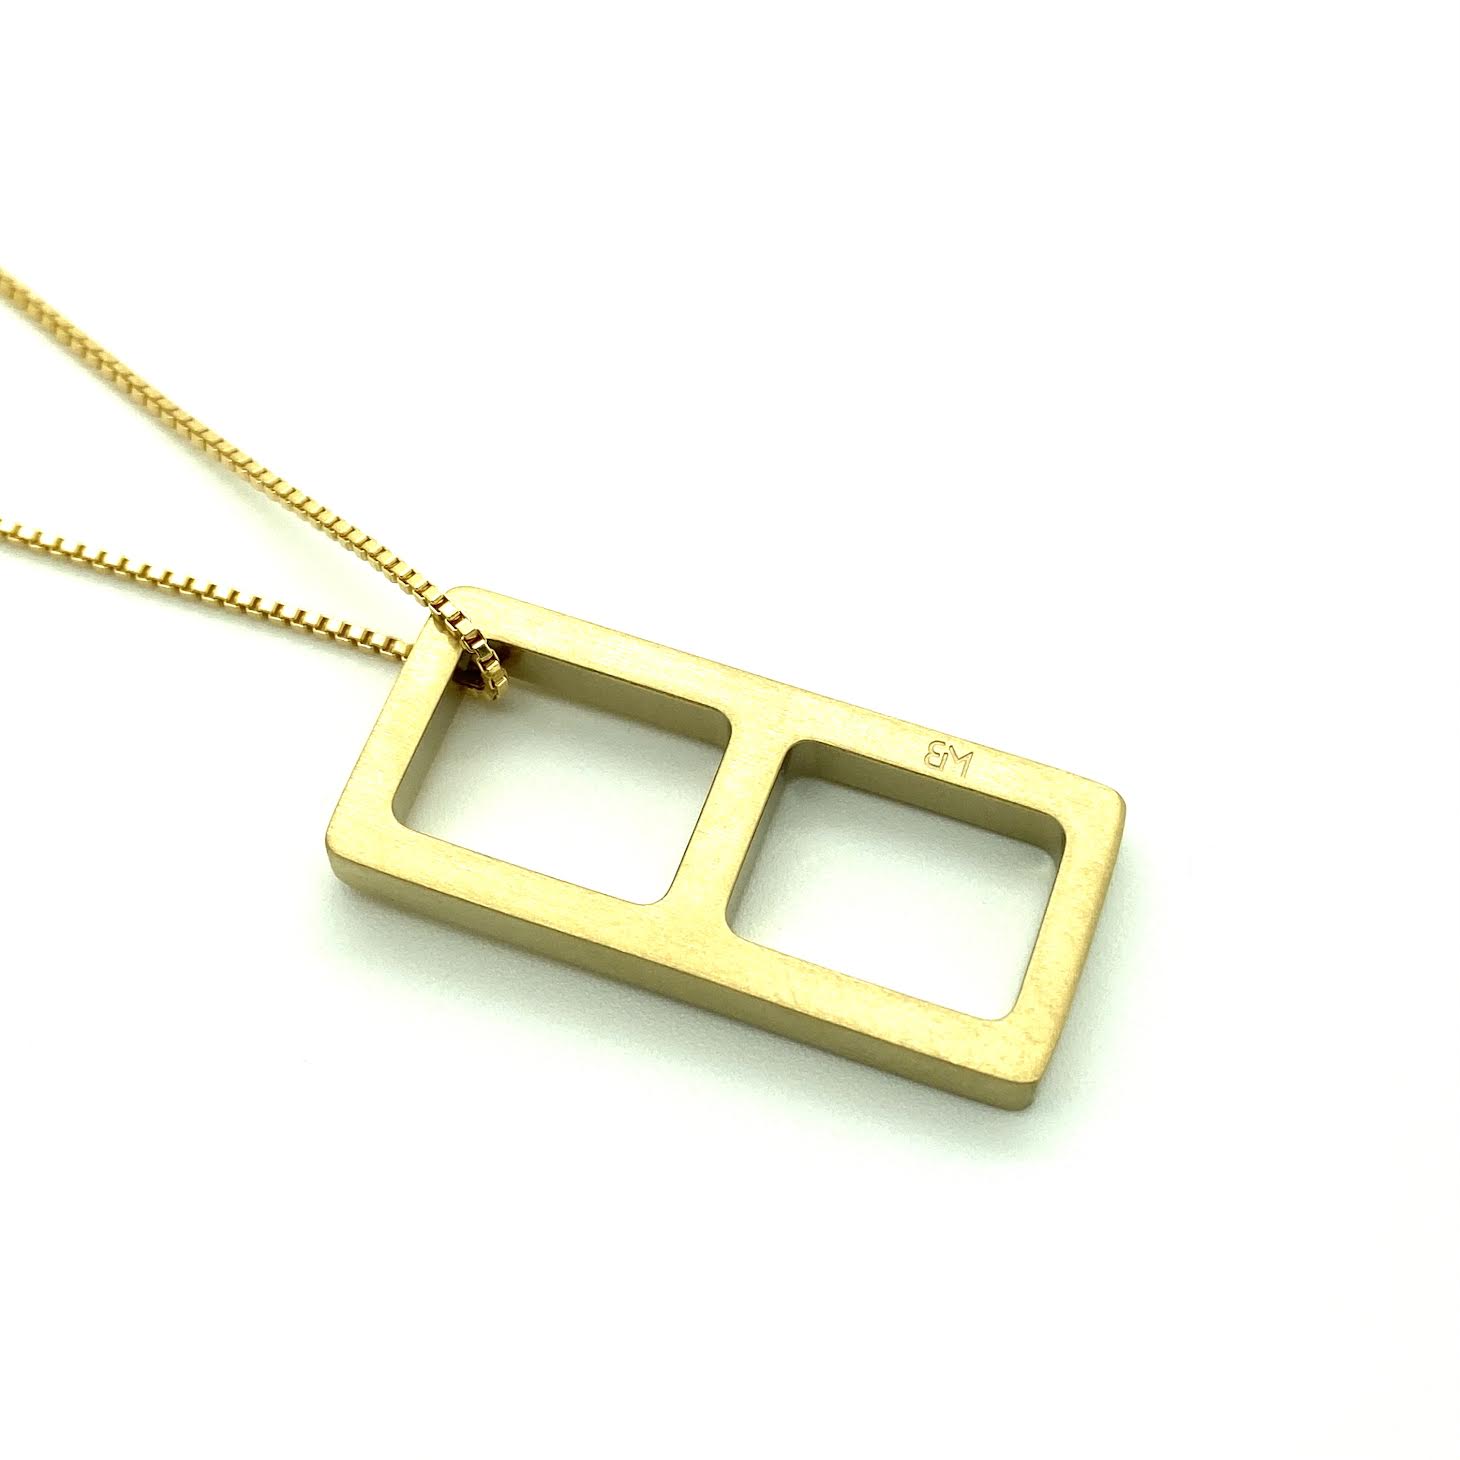 This meticulously designed with a geometrical flavor, this brushed yellow gold pendant necklace is perfect worn alone or paired with a WristBend stacking bracelet. Made by WristBend